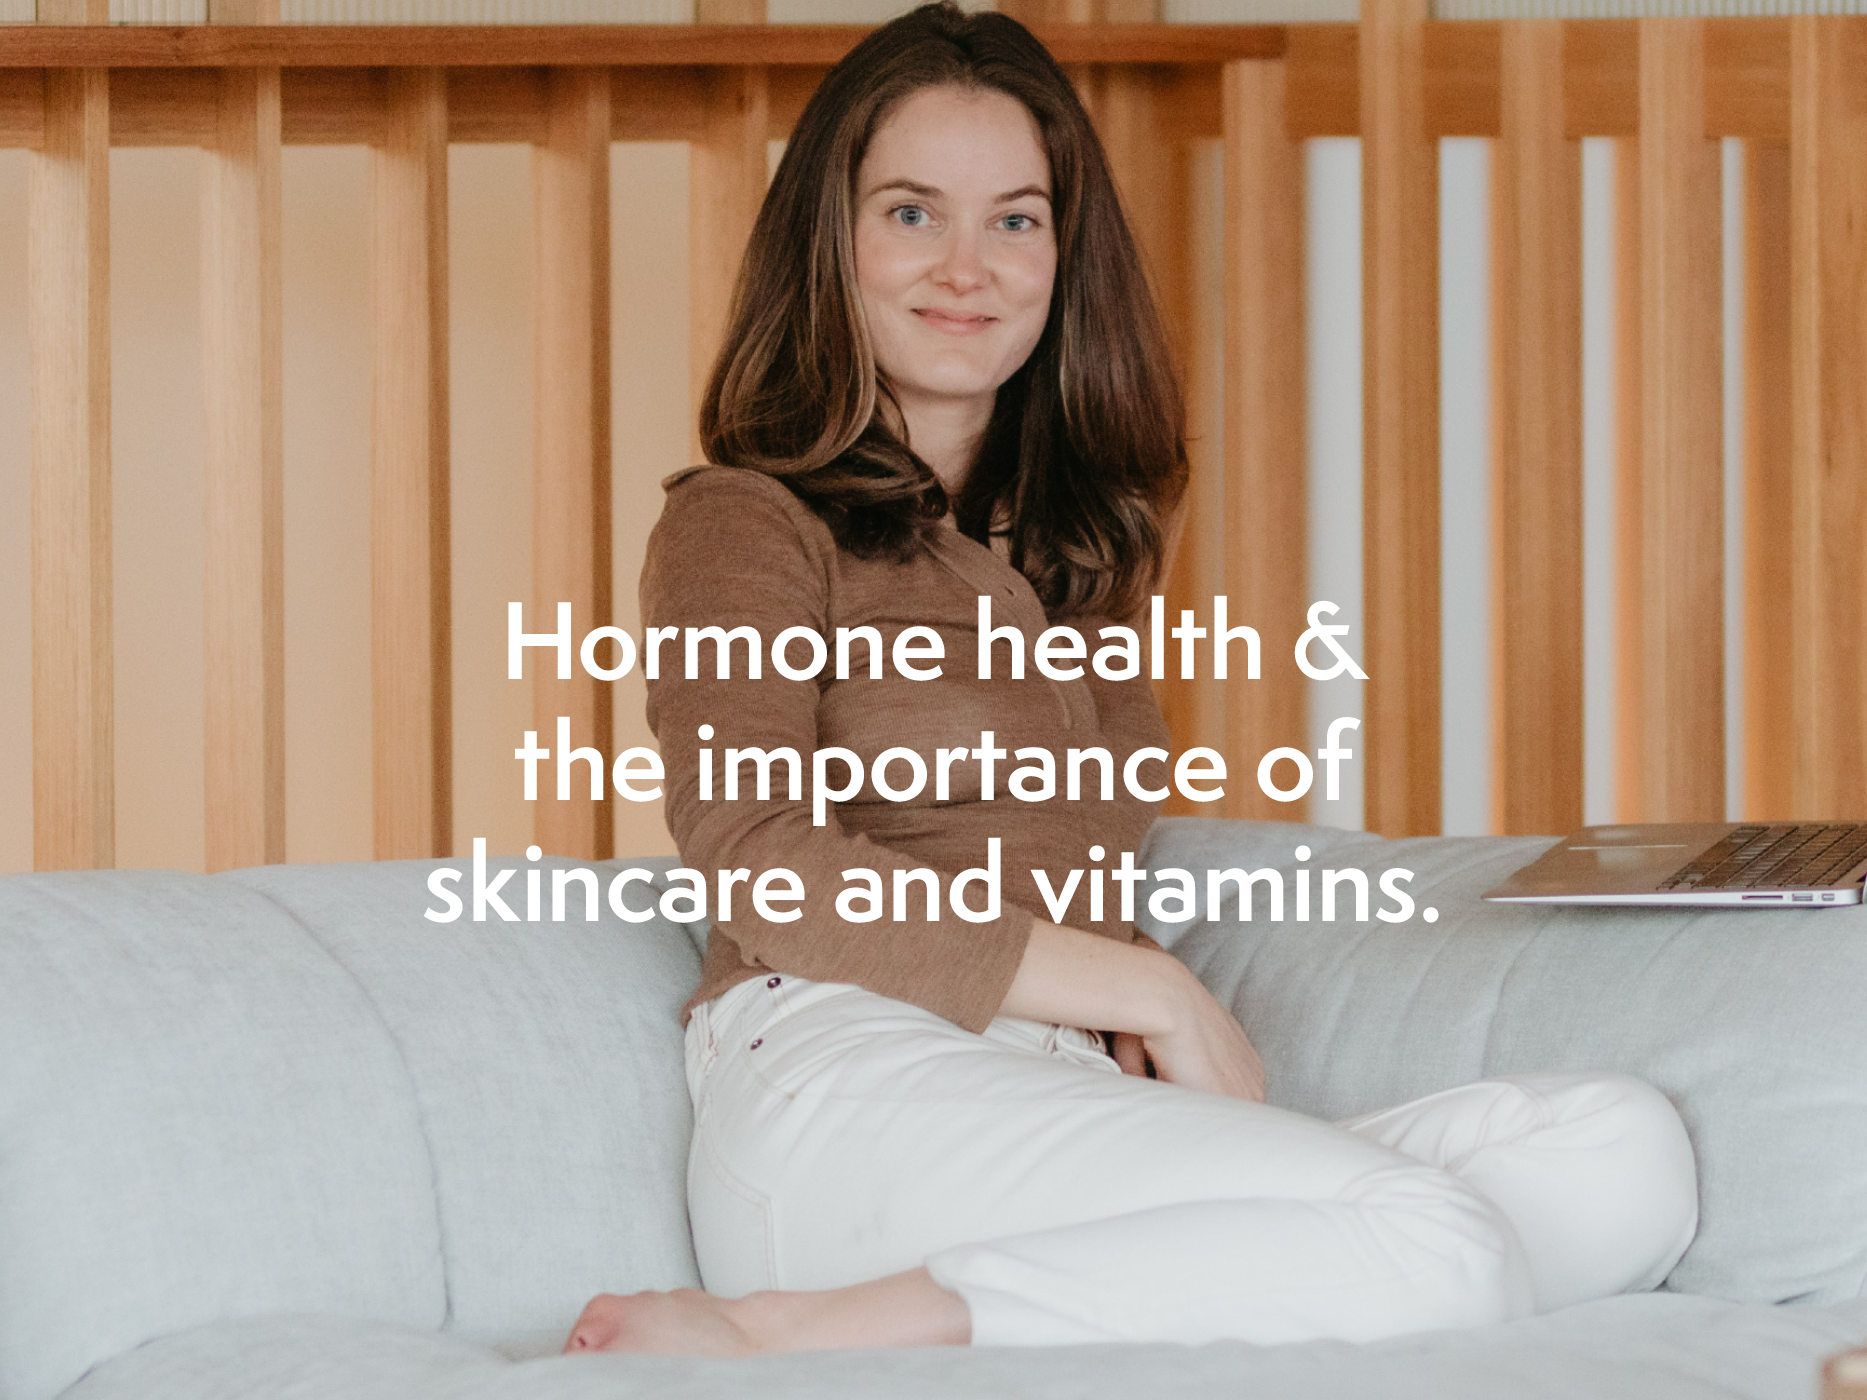 Hormone health & the importance of skincare & vitamins.